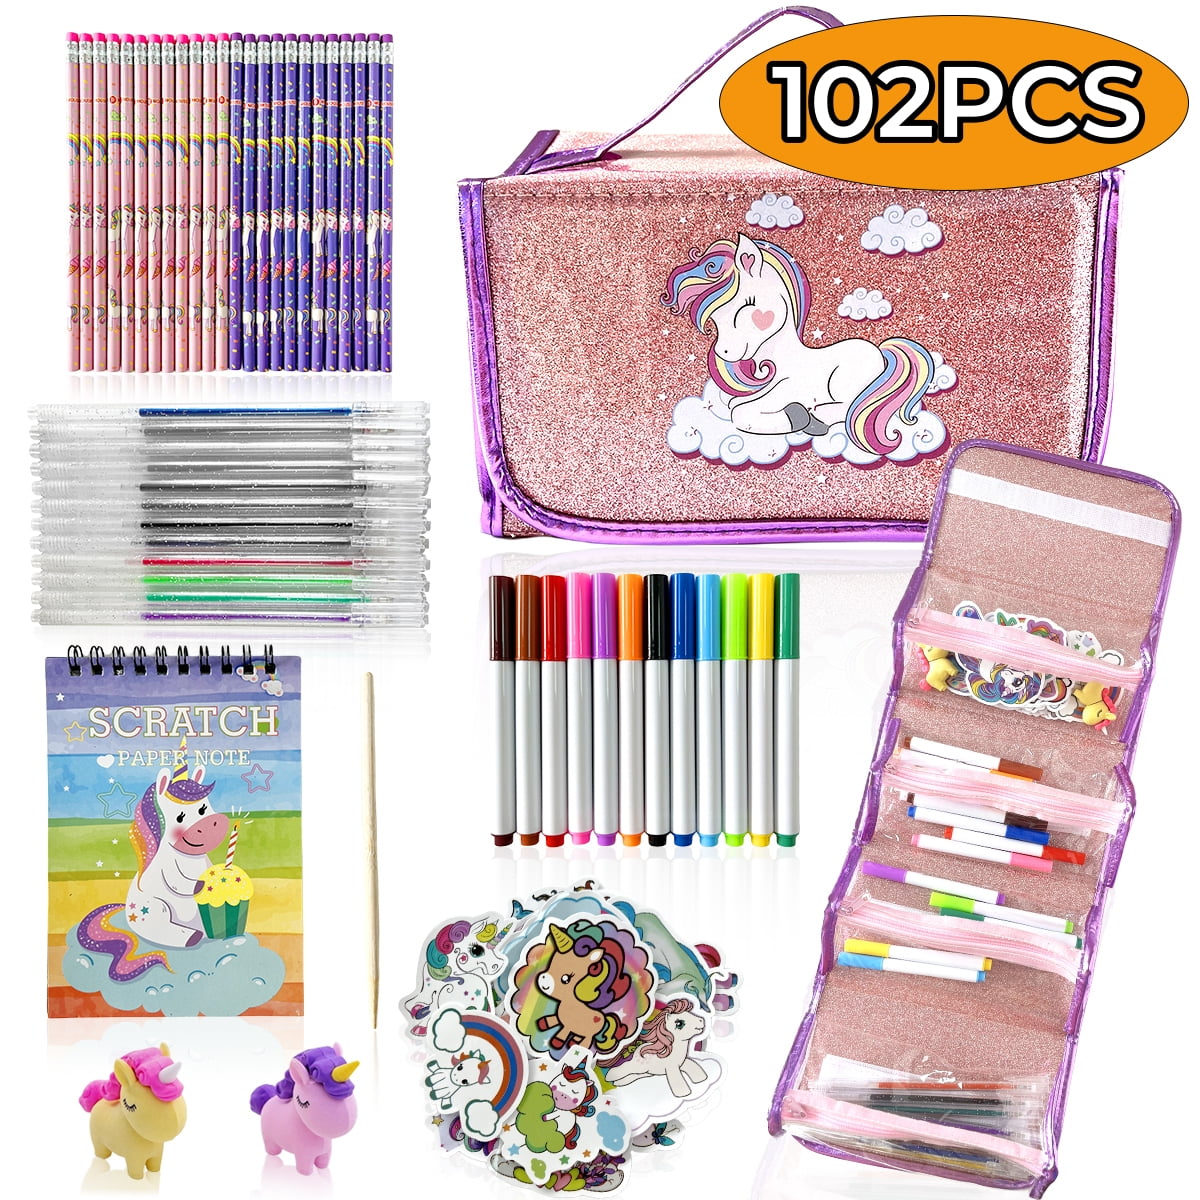 FTBox 72 PCS Unicorn Markers Set with Pencil Case, Acrylic Marker, Pencils,  Twistable Crayons, Glitter Pen, Perfect Art Supplies Christmas Gift for